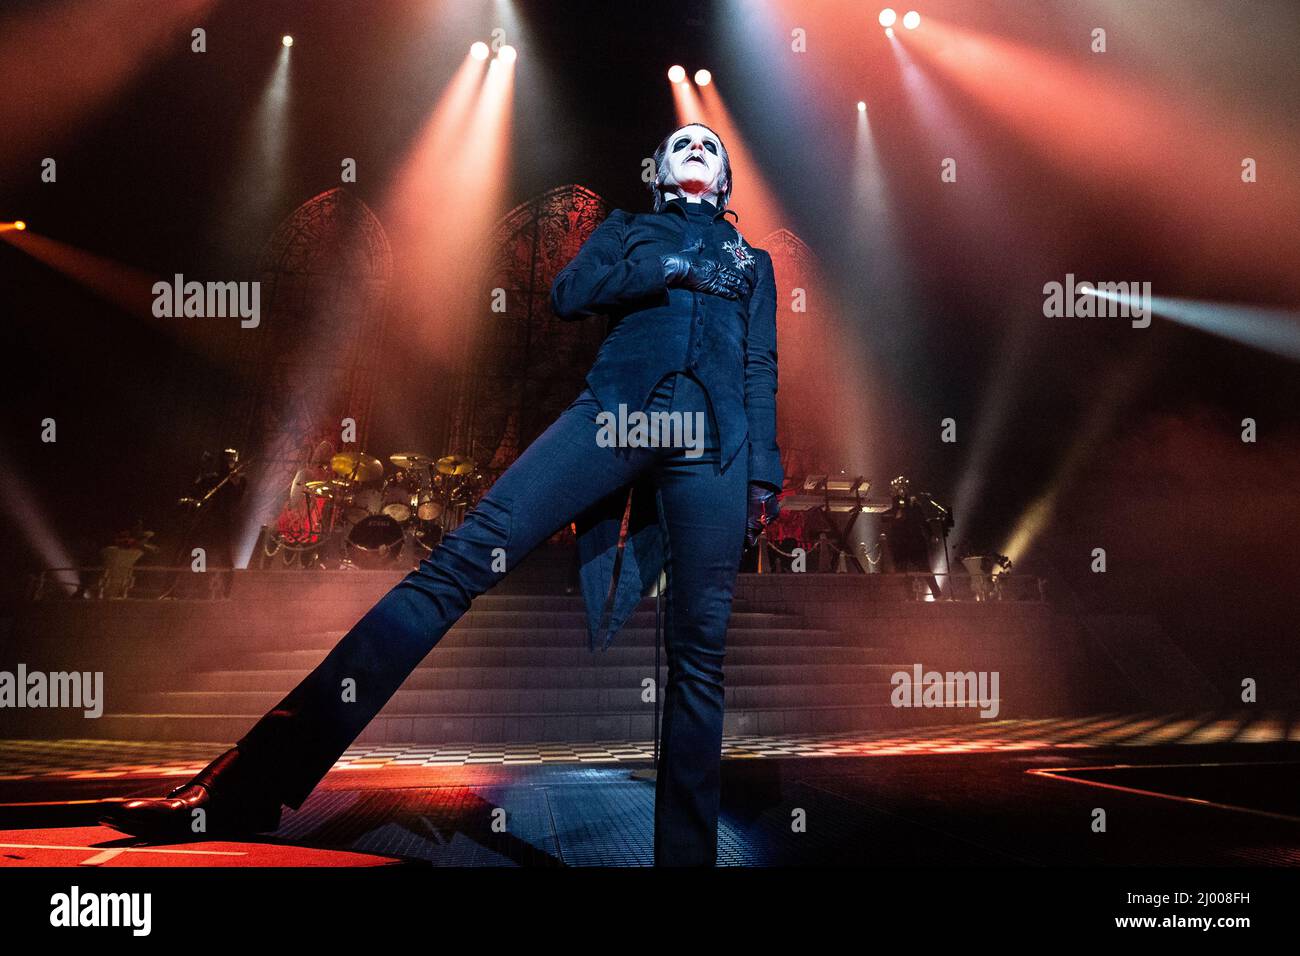 Tobias Forge of rock band Ghost performing live in concert at Oslo Spektrum on 22 February 2019 Stock Photo